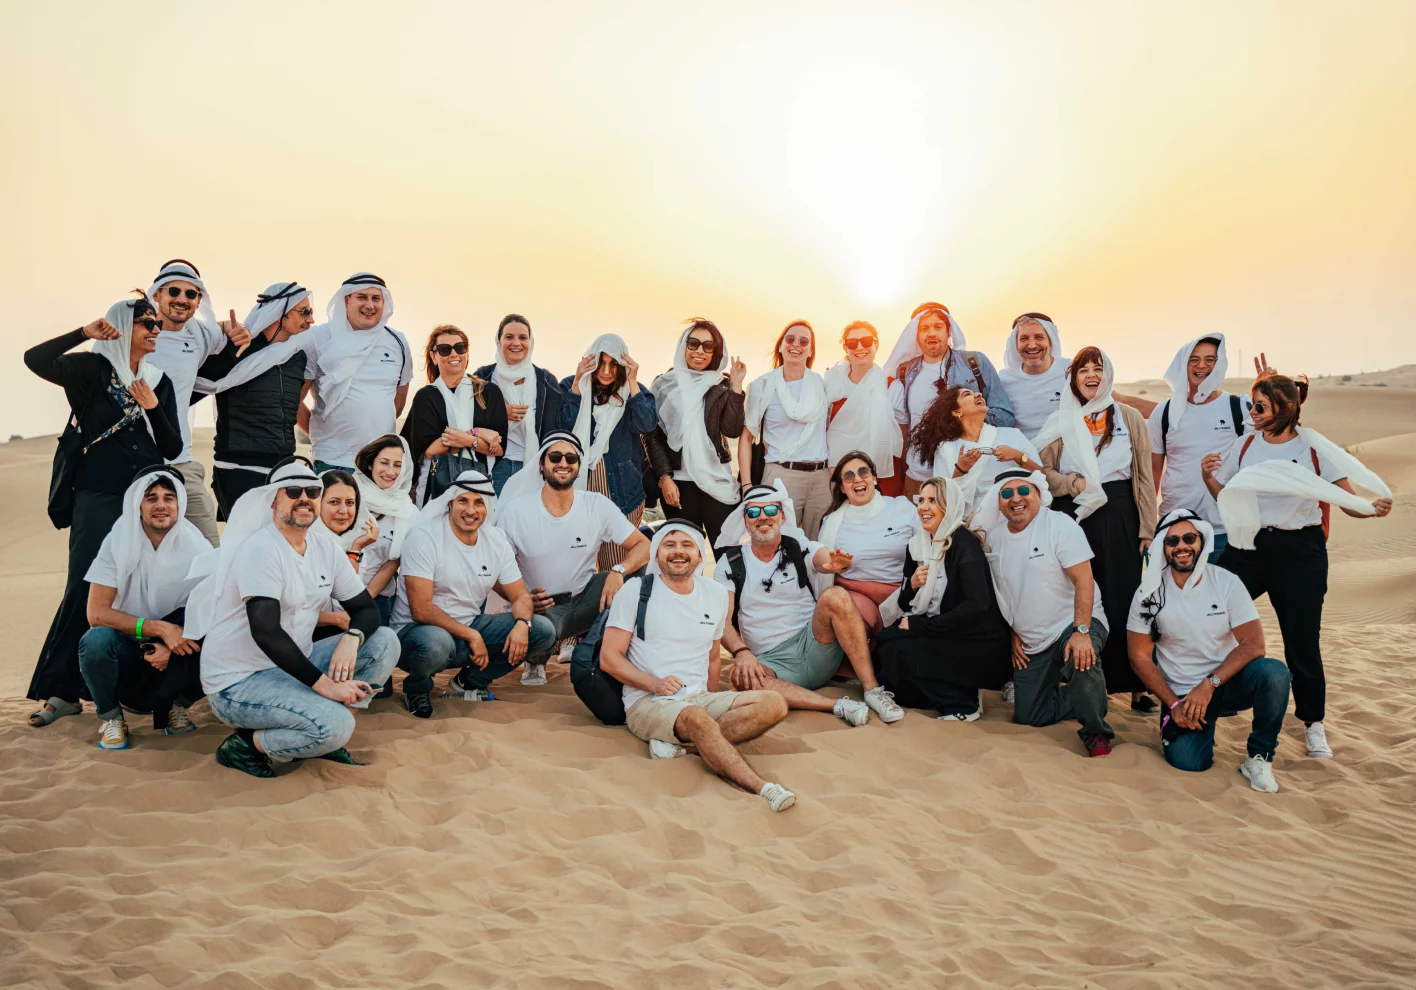 Large group of Jellysmack employees posing in the sand dunes at sunset dressed mostly in white. 